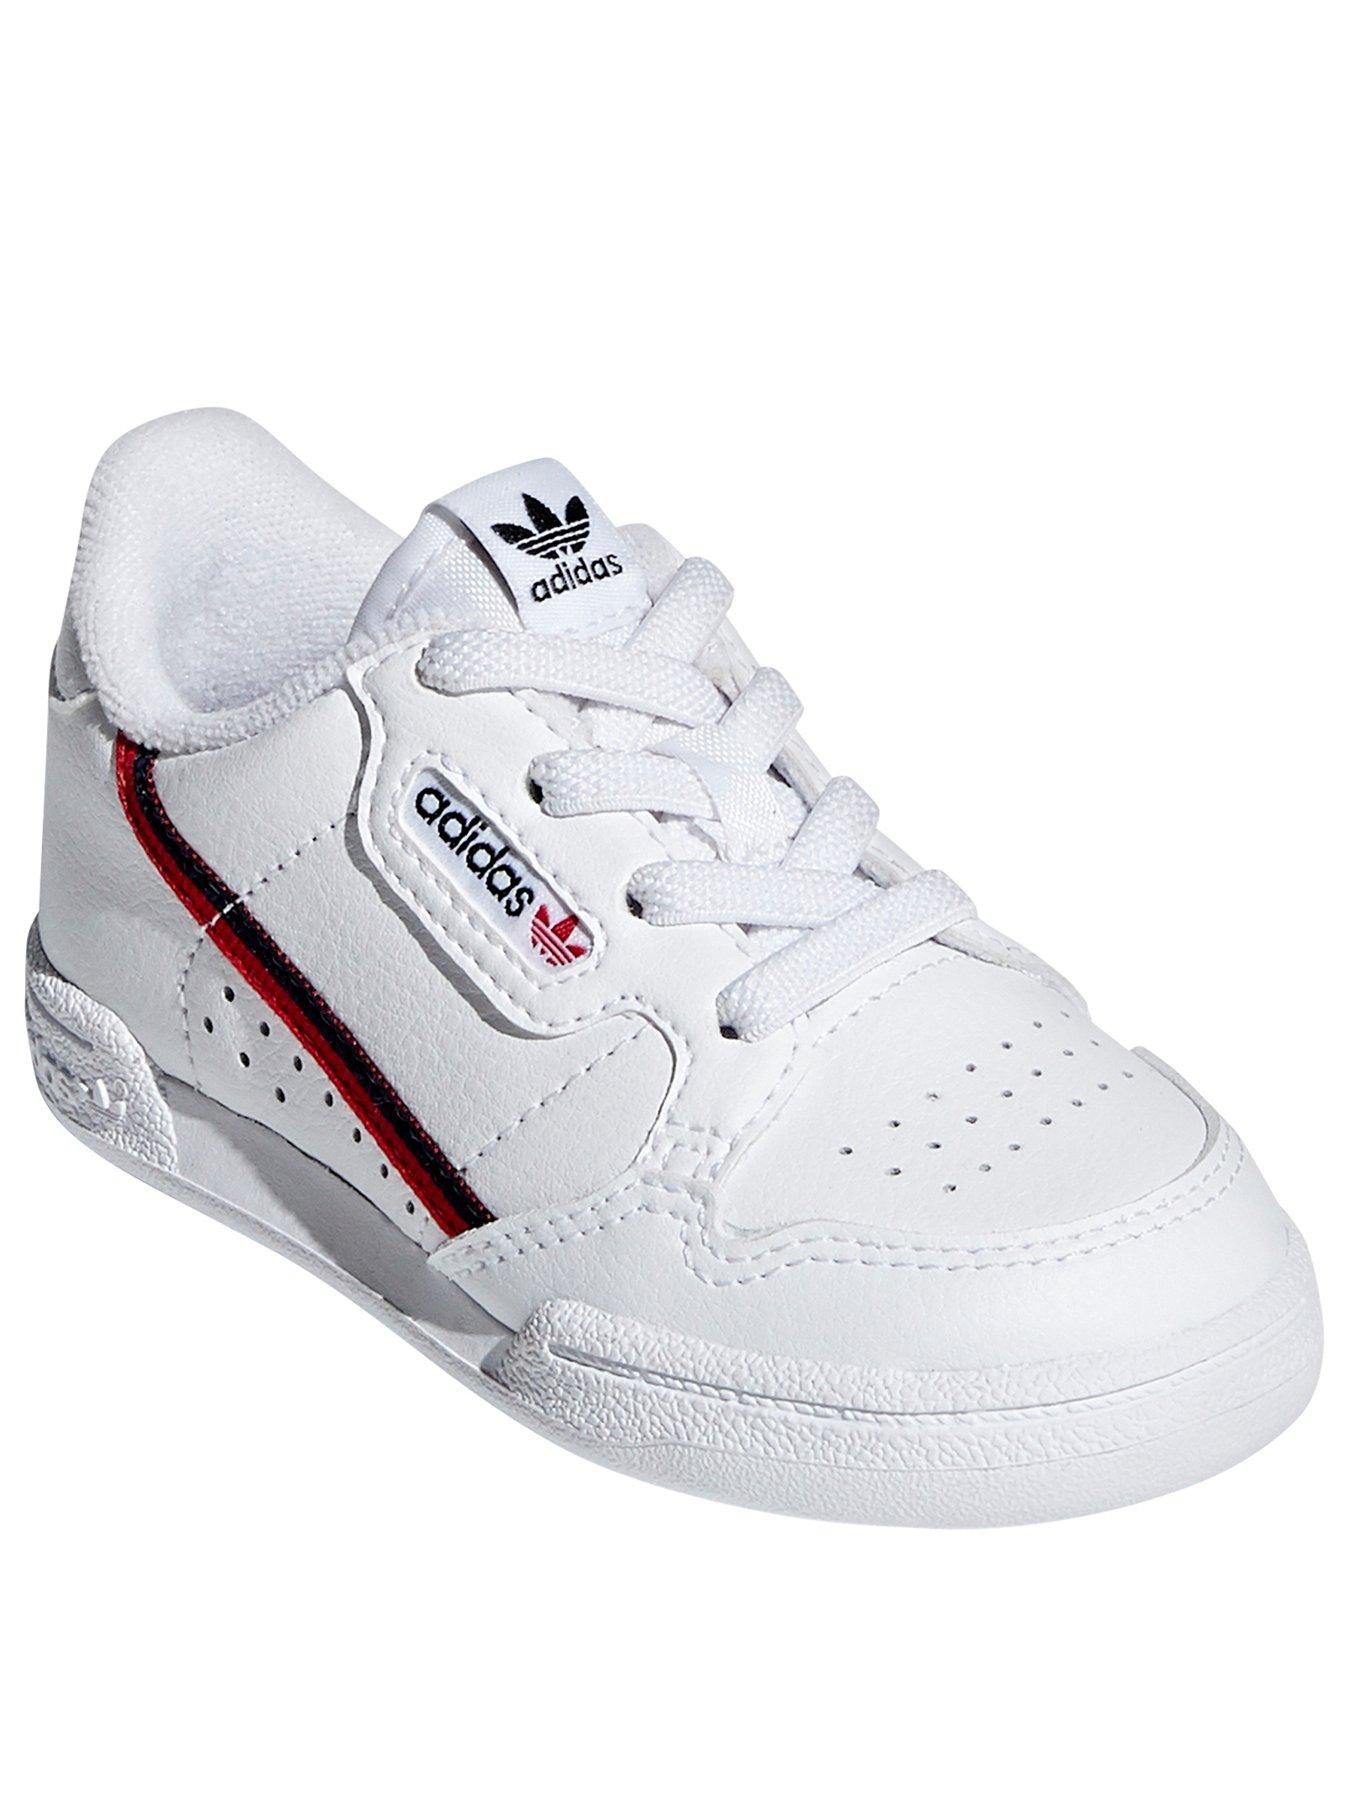 boys trainers size 13